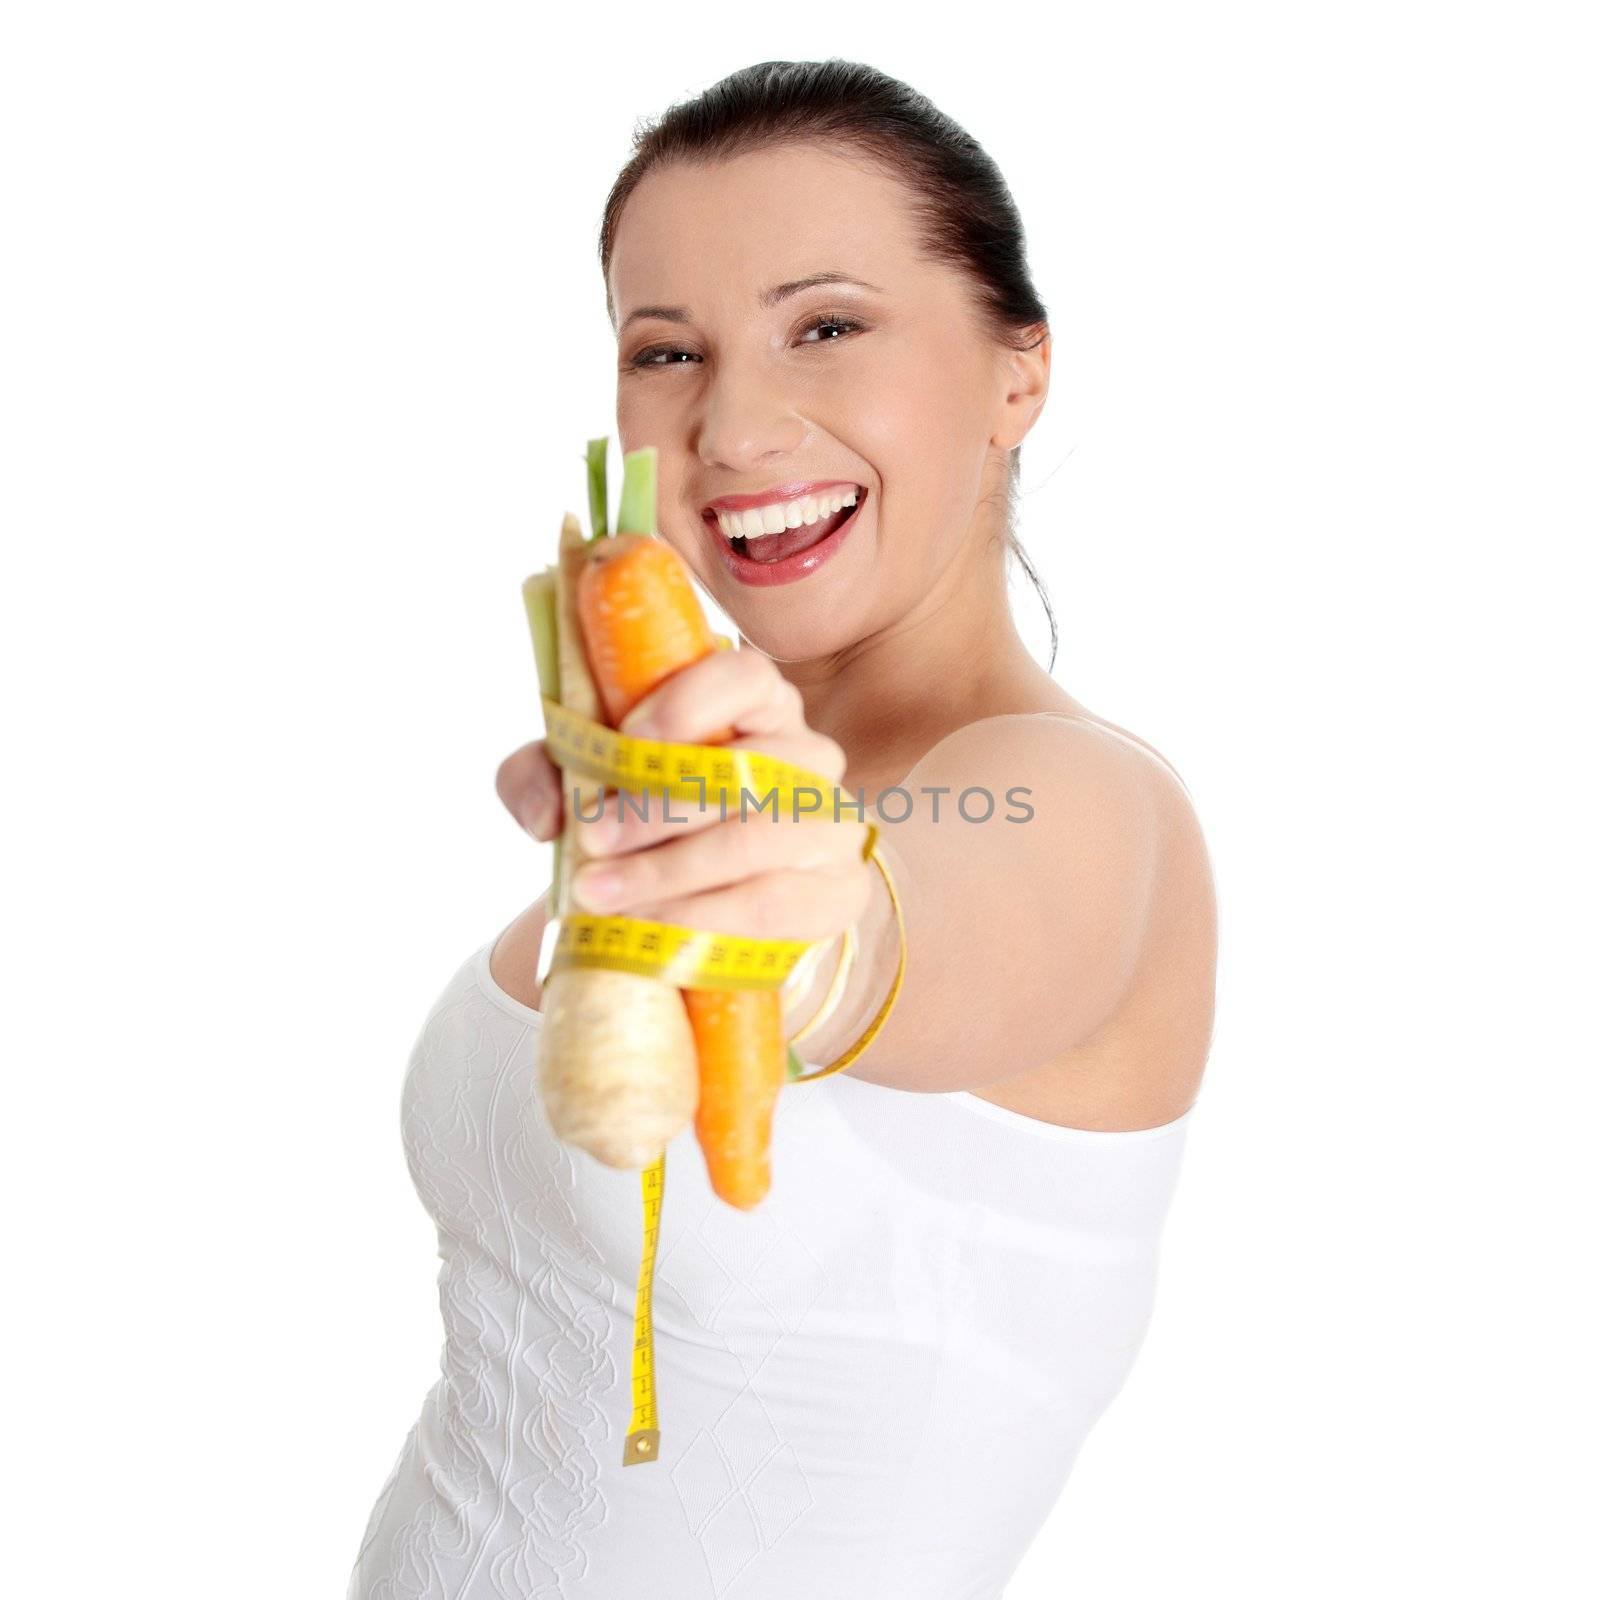 Woman's hand holding vegetables and measuring tape, isolated on white. Diet concept